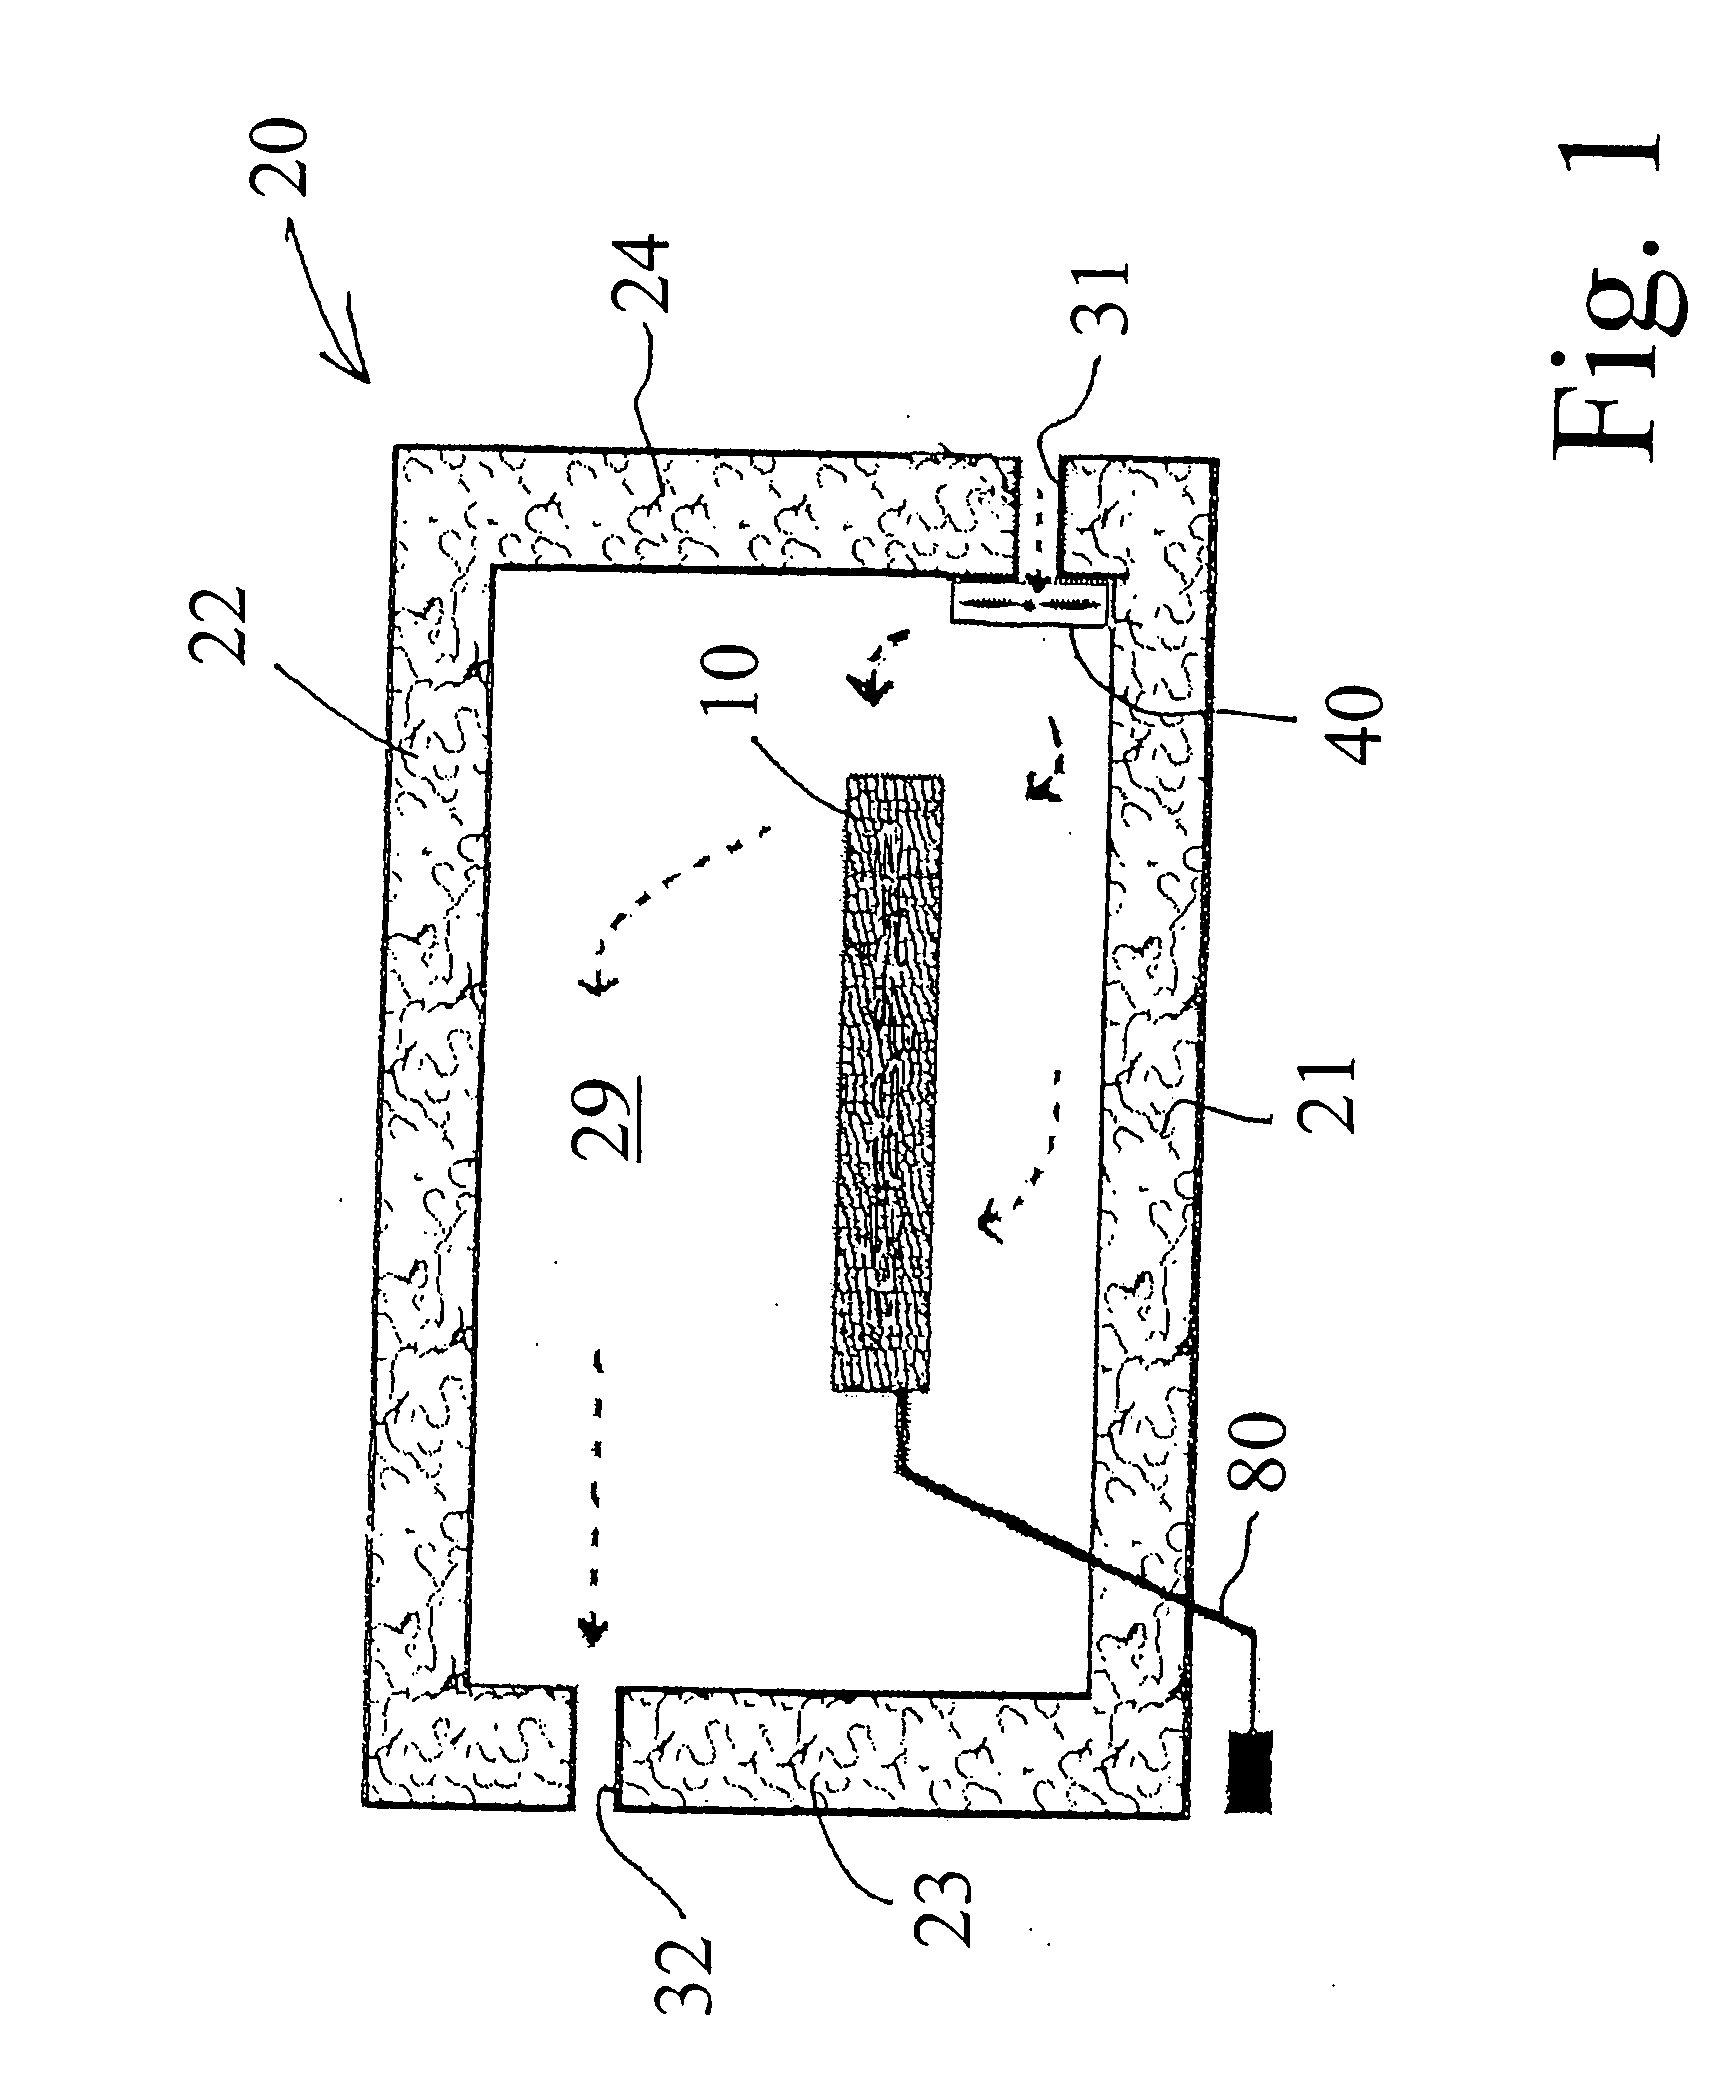 Fire resistant and/or water resistant enclosure for operable computer digital data storage device